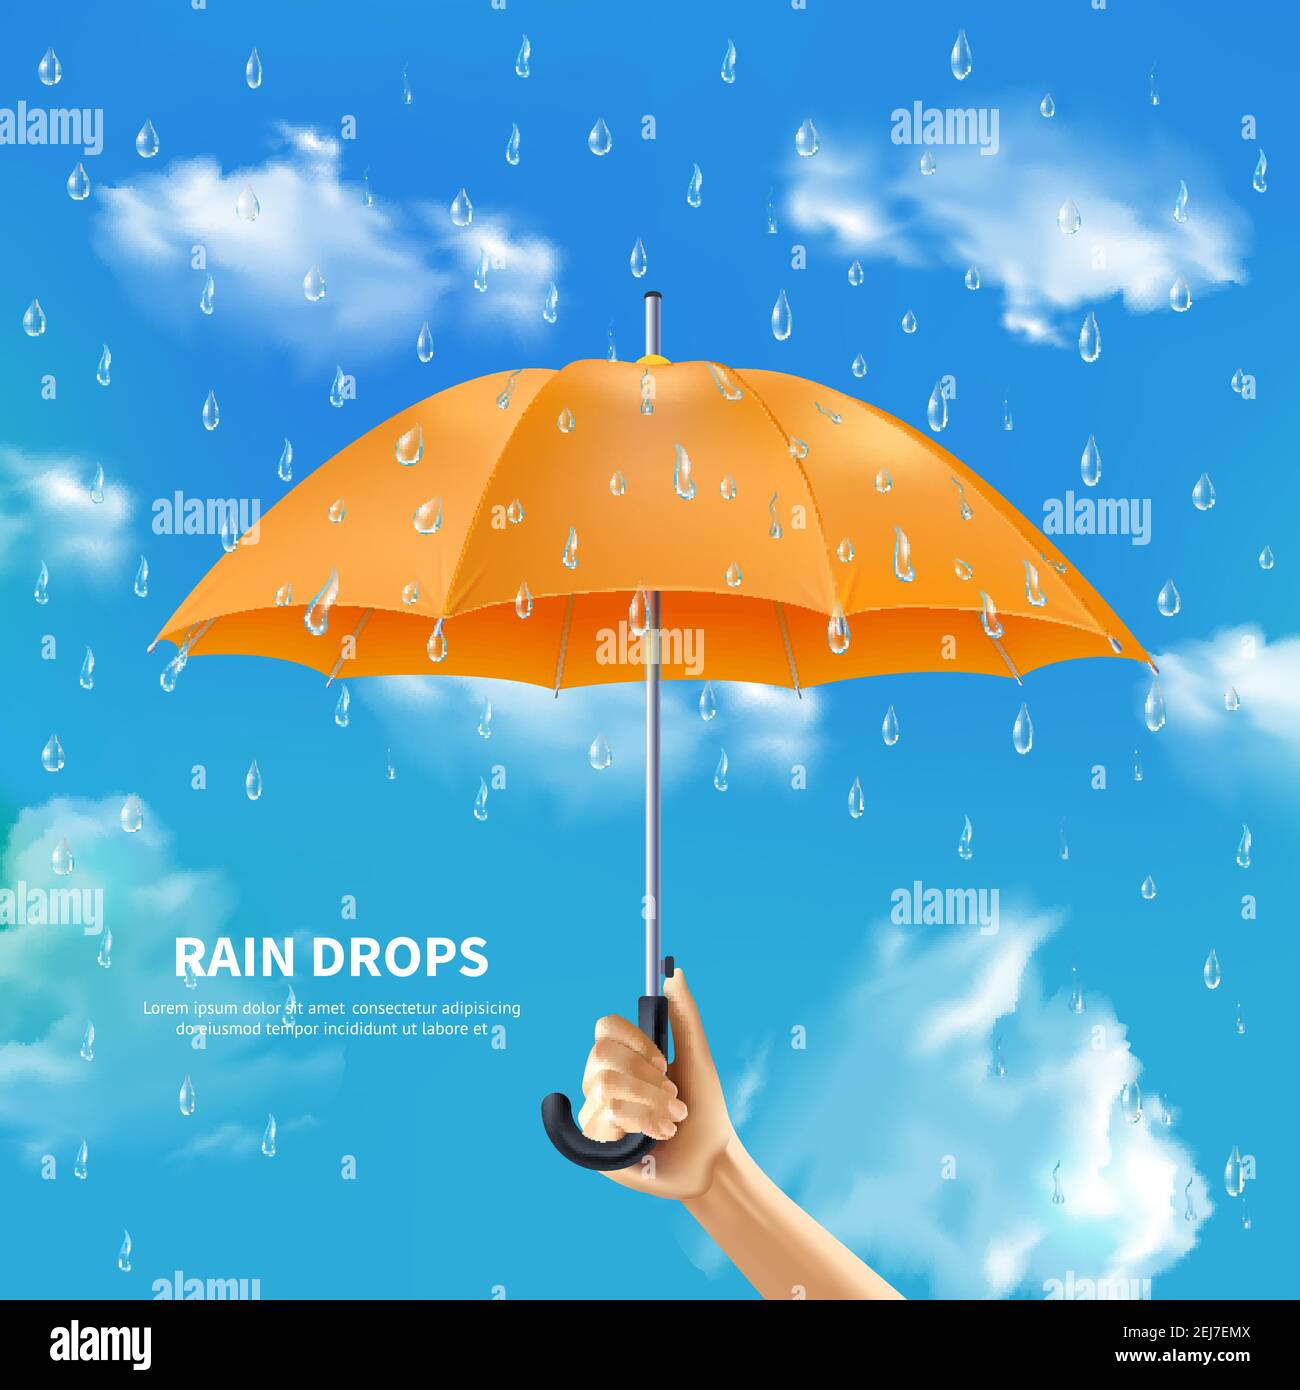 Rain drops realistic poster with people hand holding open orange umbrella on cloudy sky background vector illustration Stock Vector